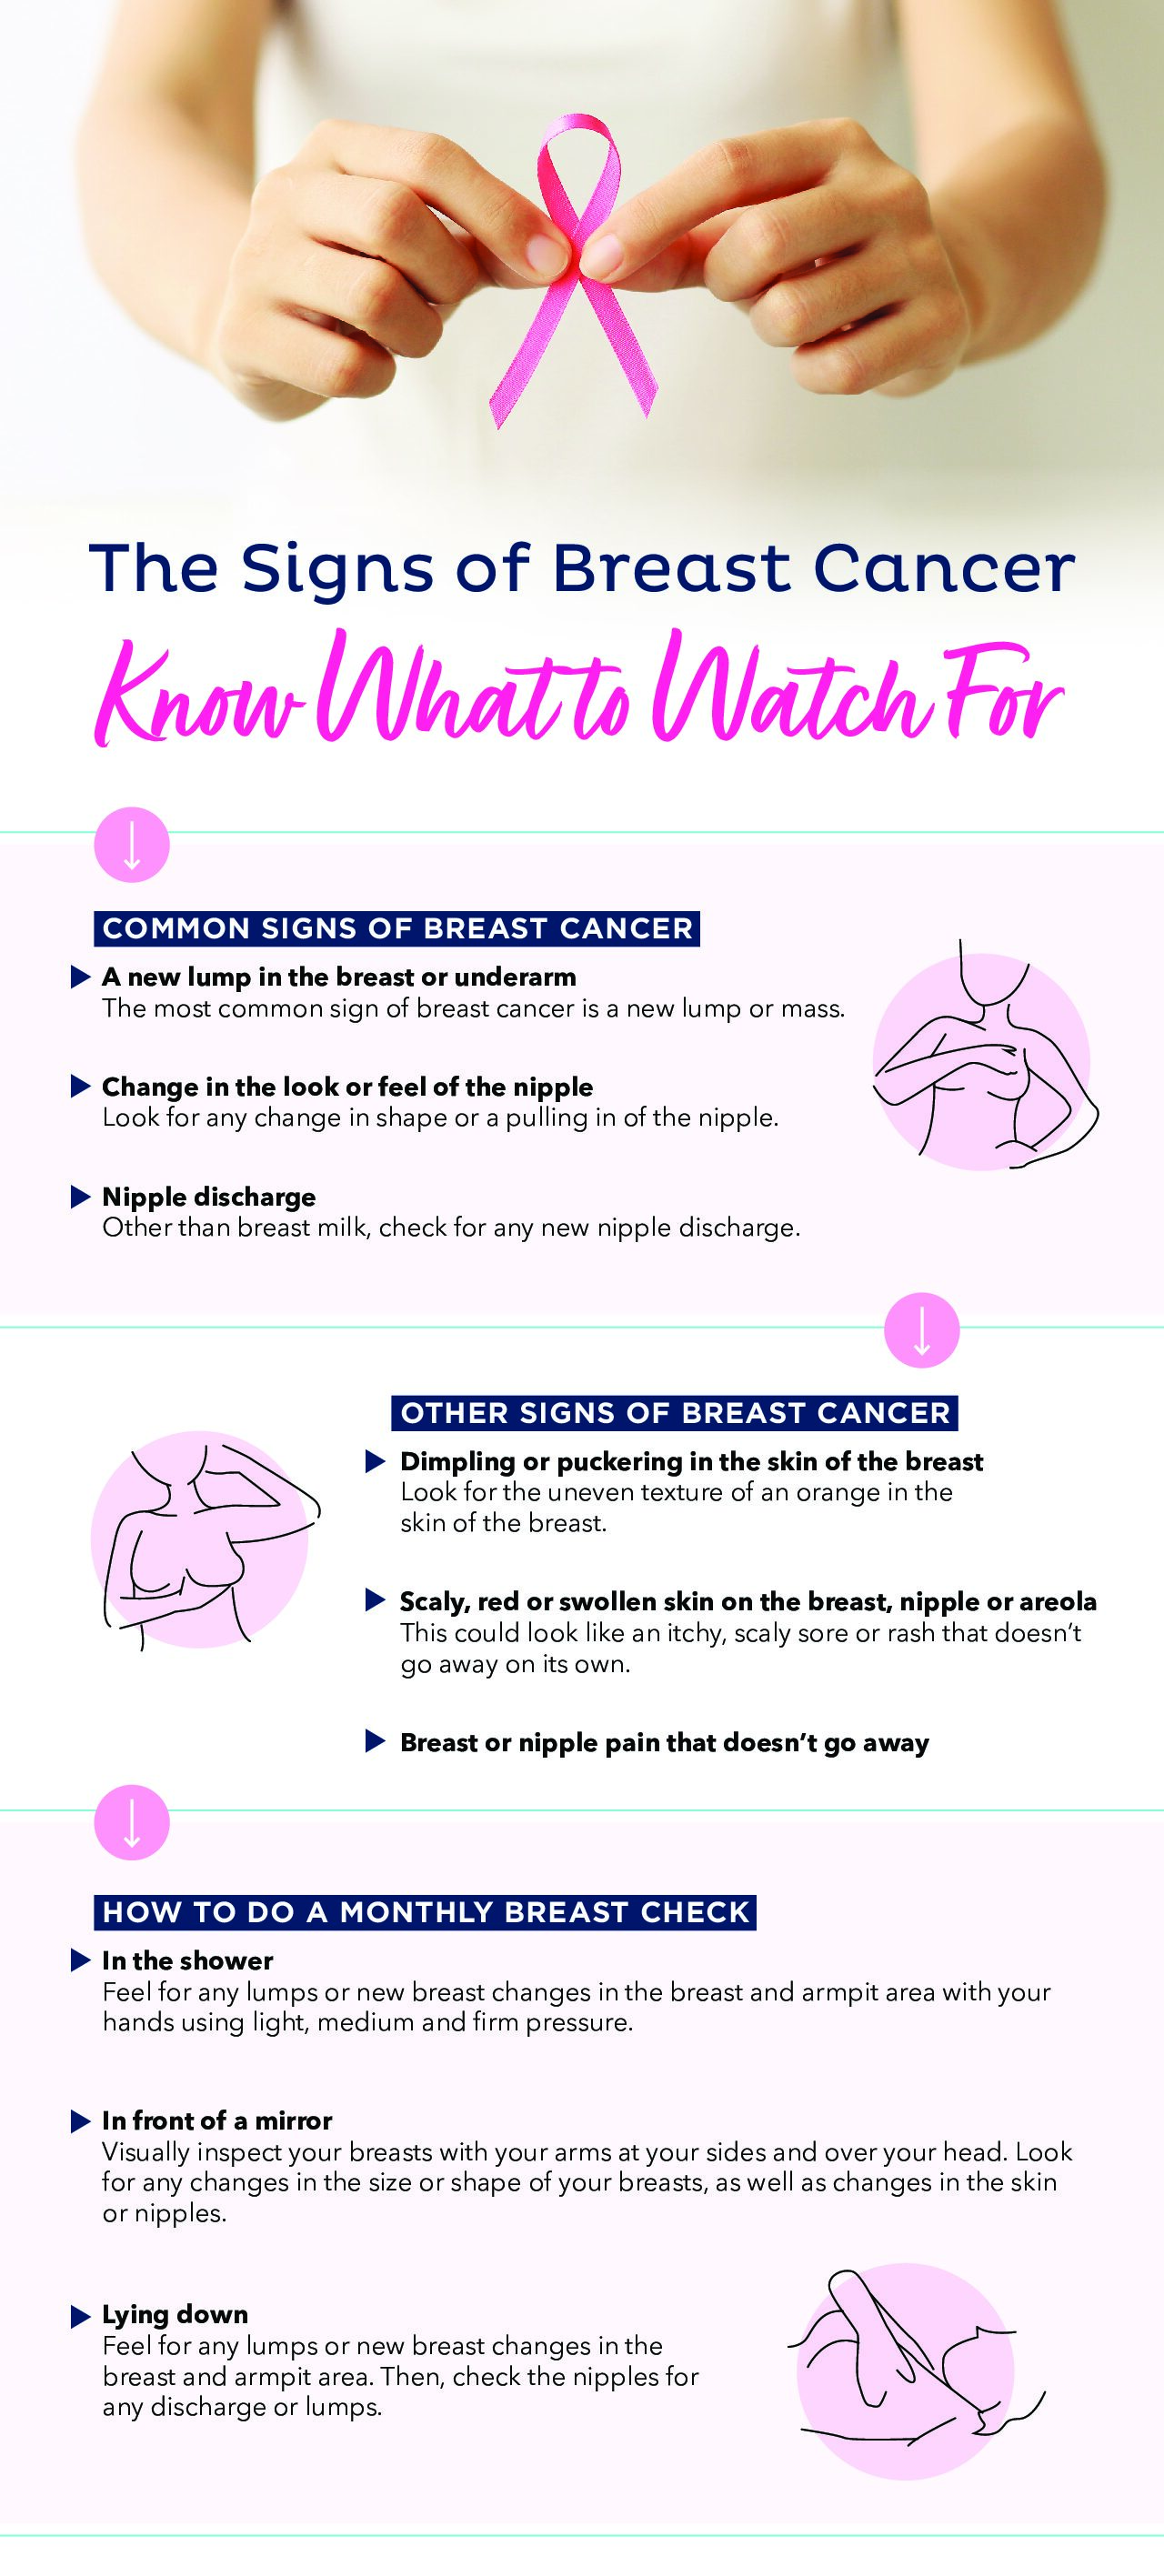 Do you have a go-to, - Breastcancer.org